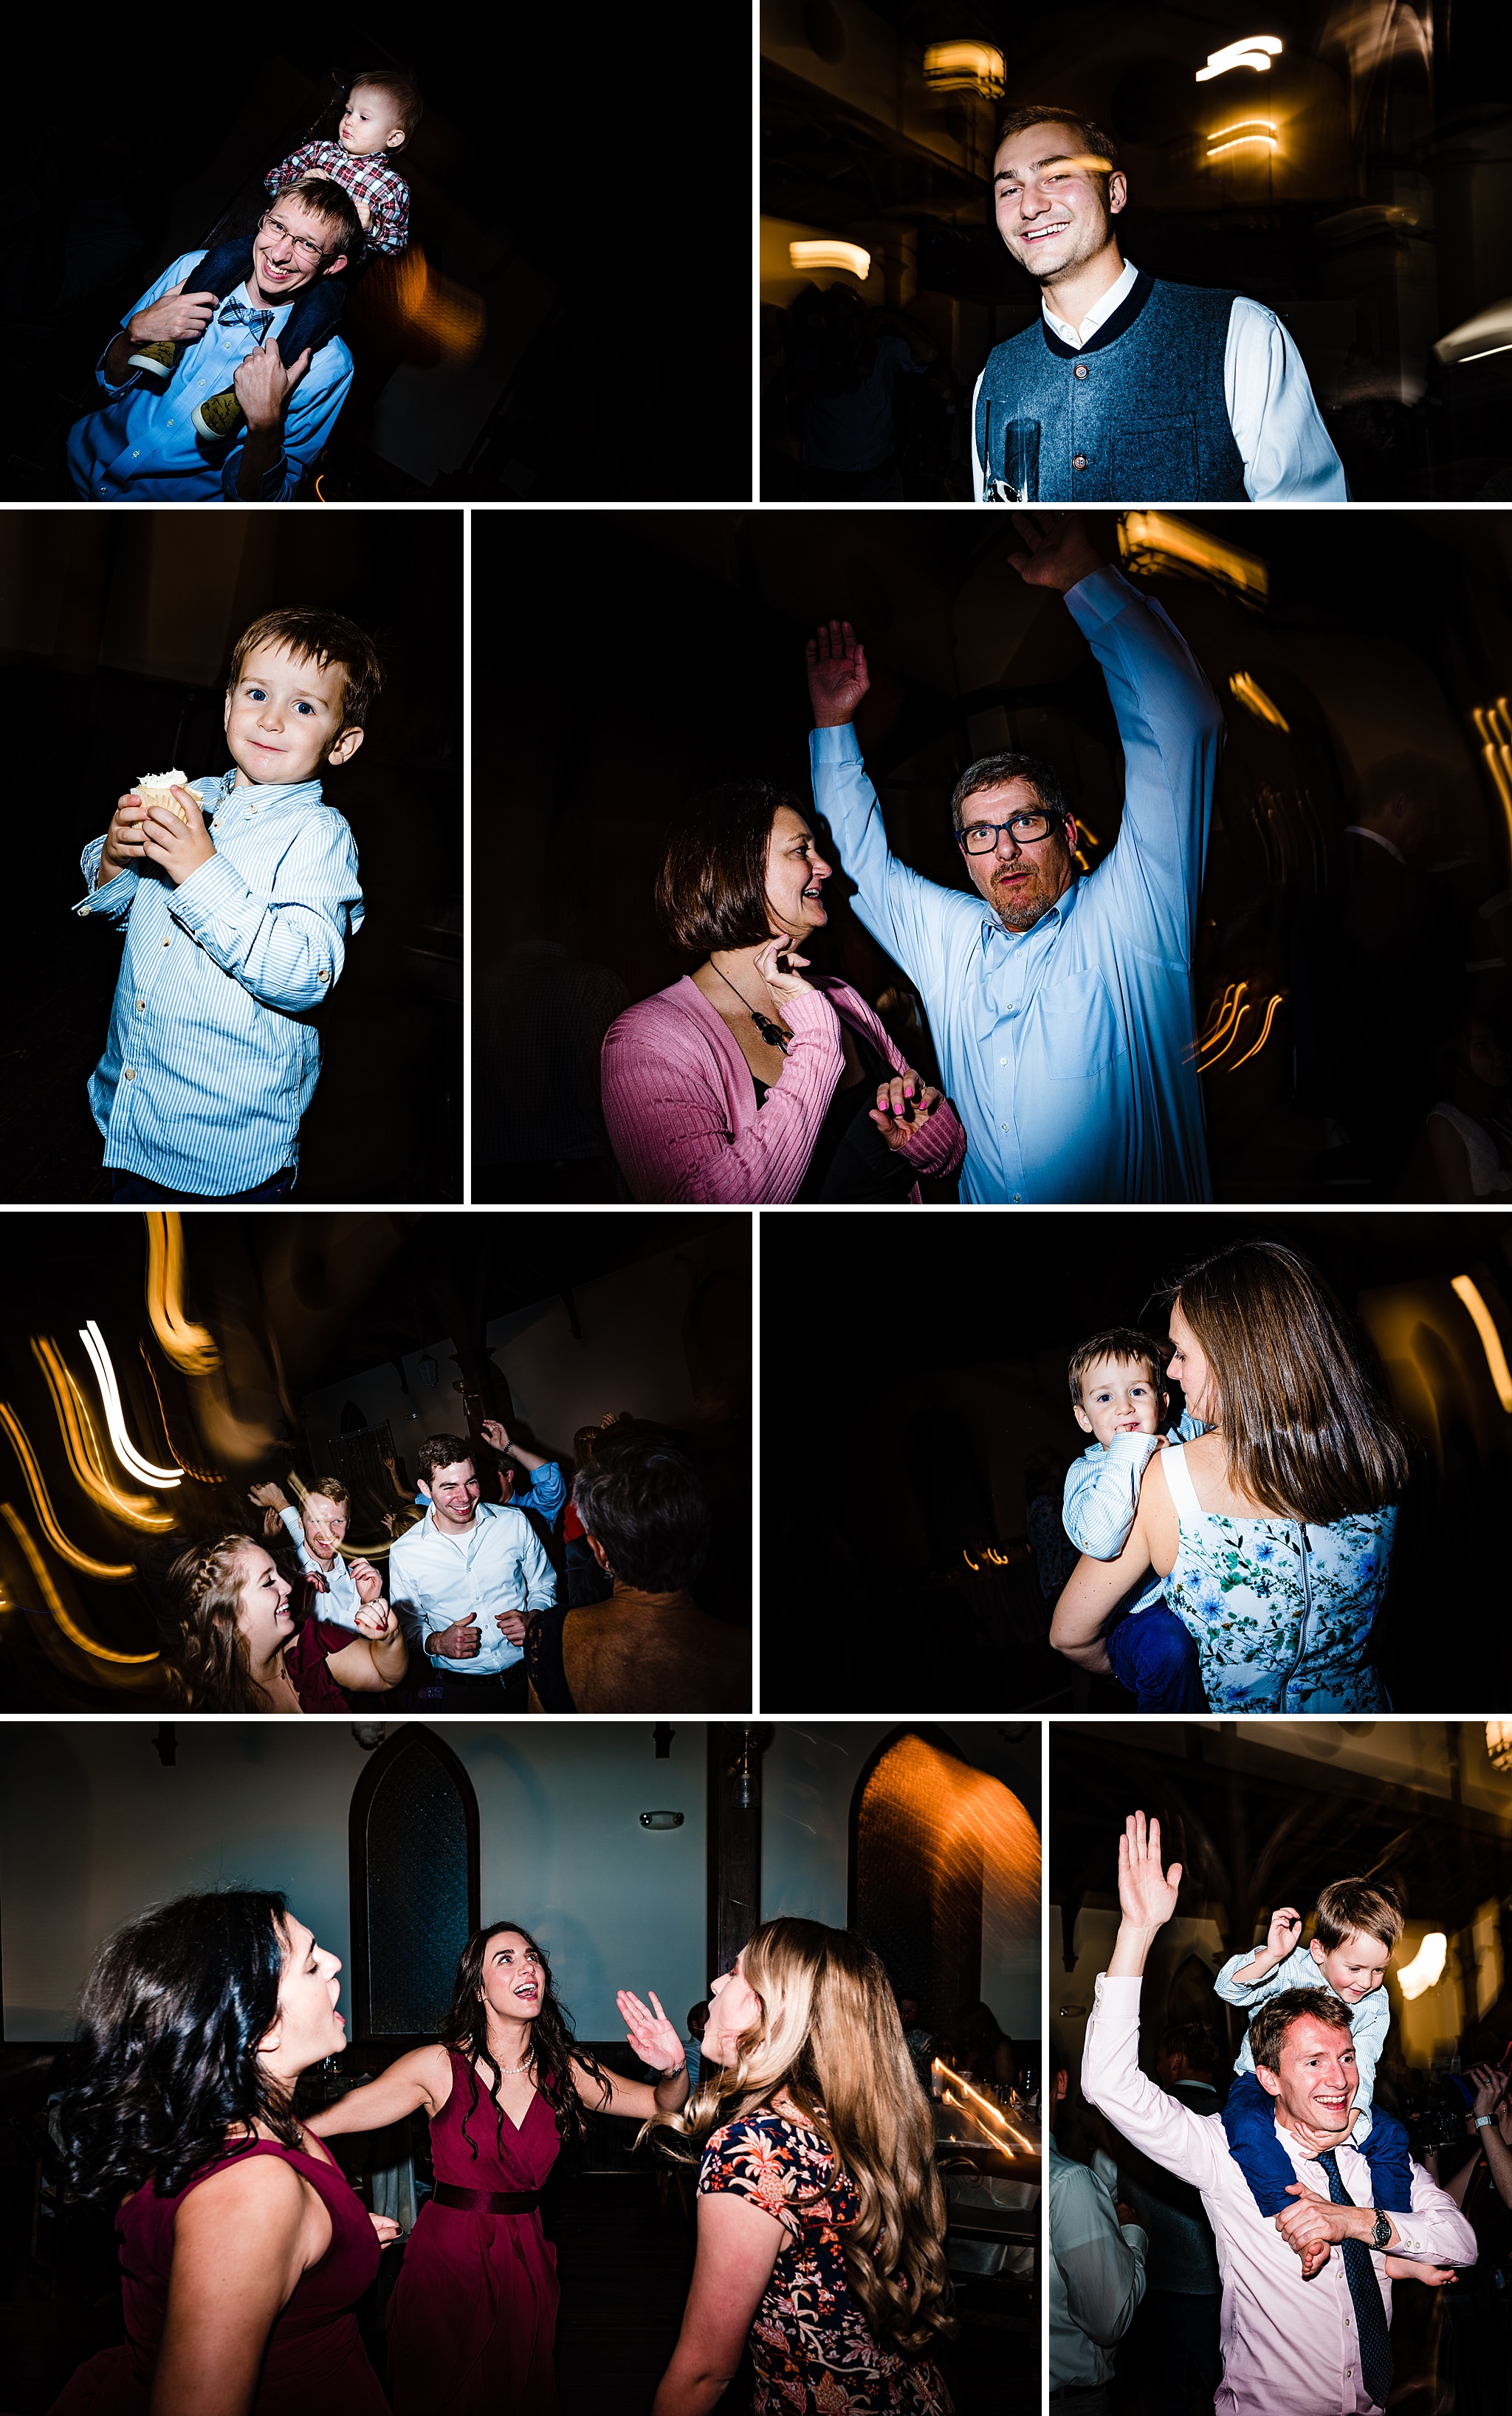 The bride and groom and their guests have fun on the dance floor during this All Saints Chapel Raleigh wedding